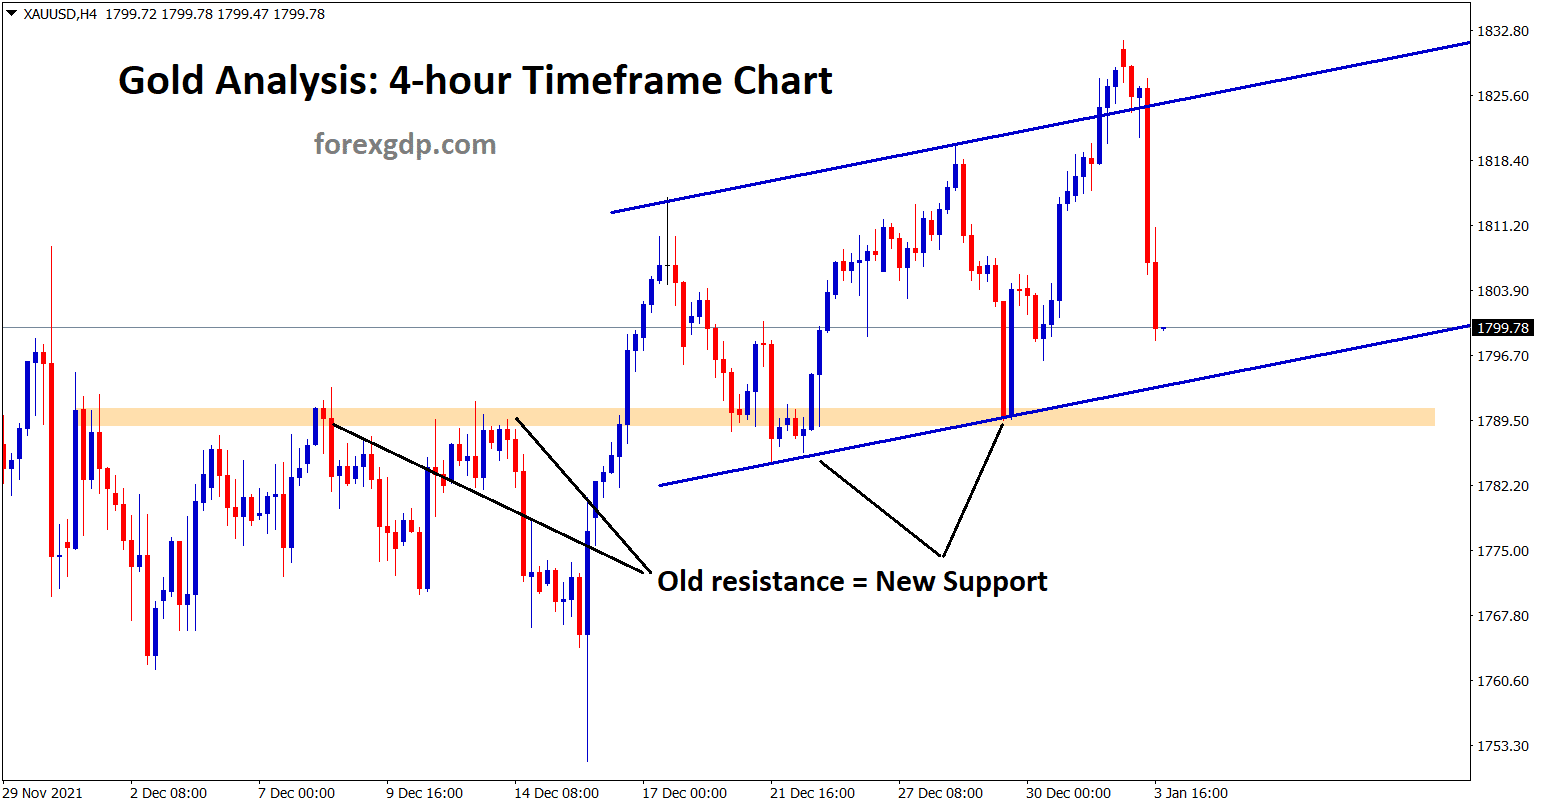 Gold price going to reach the low support level in 4 hour timeframe